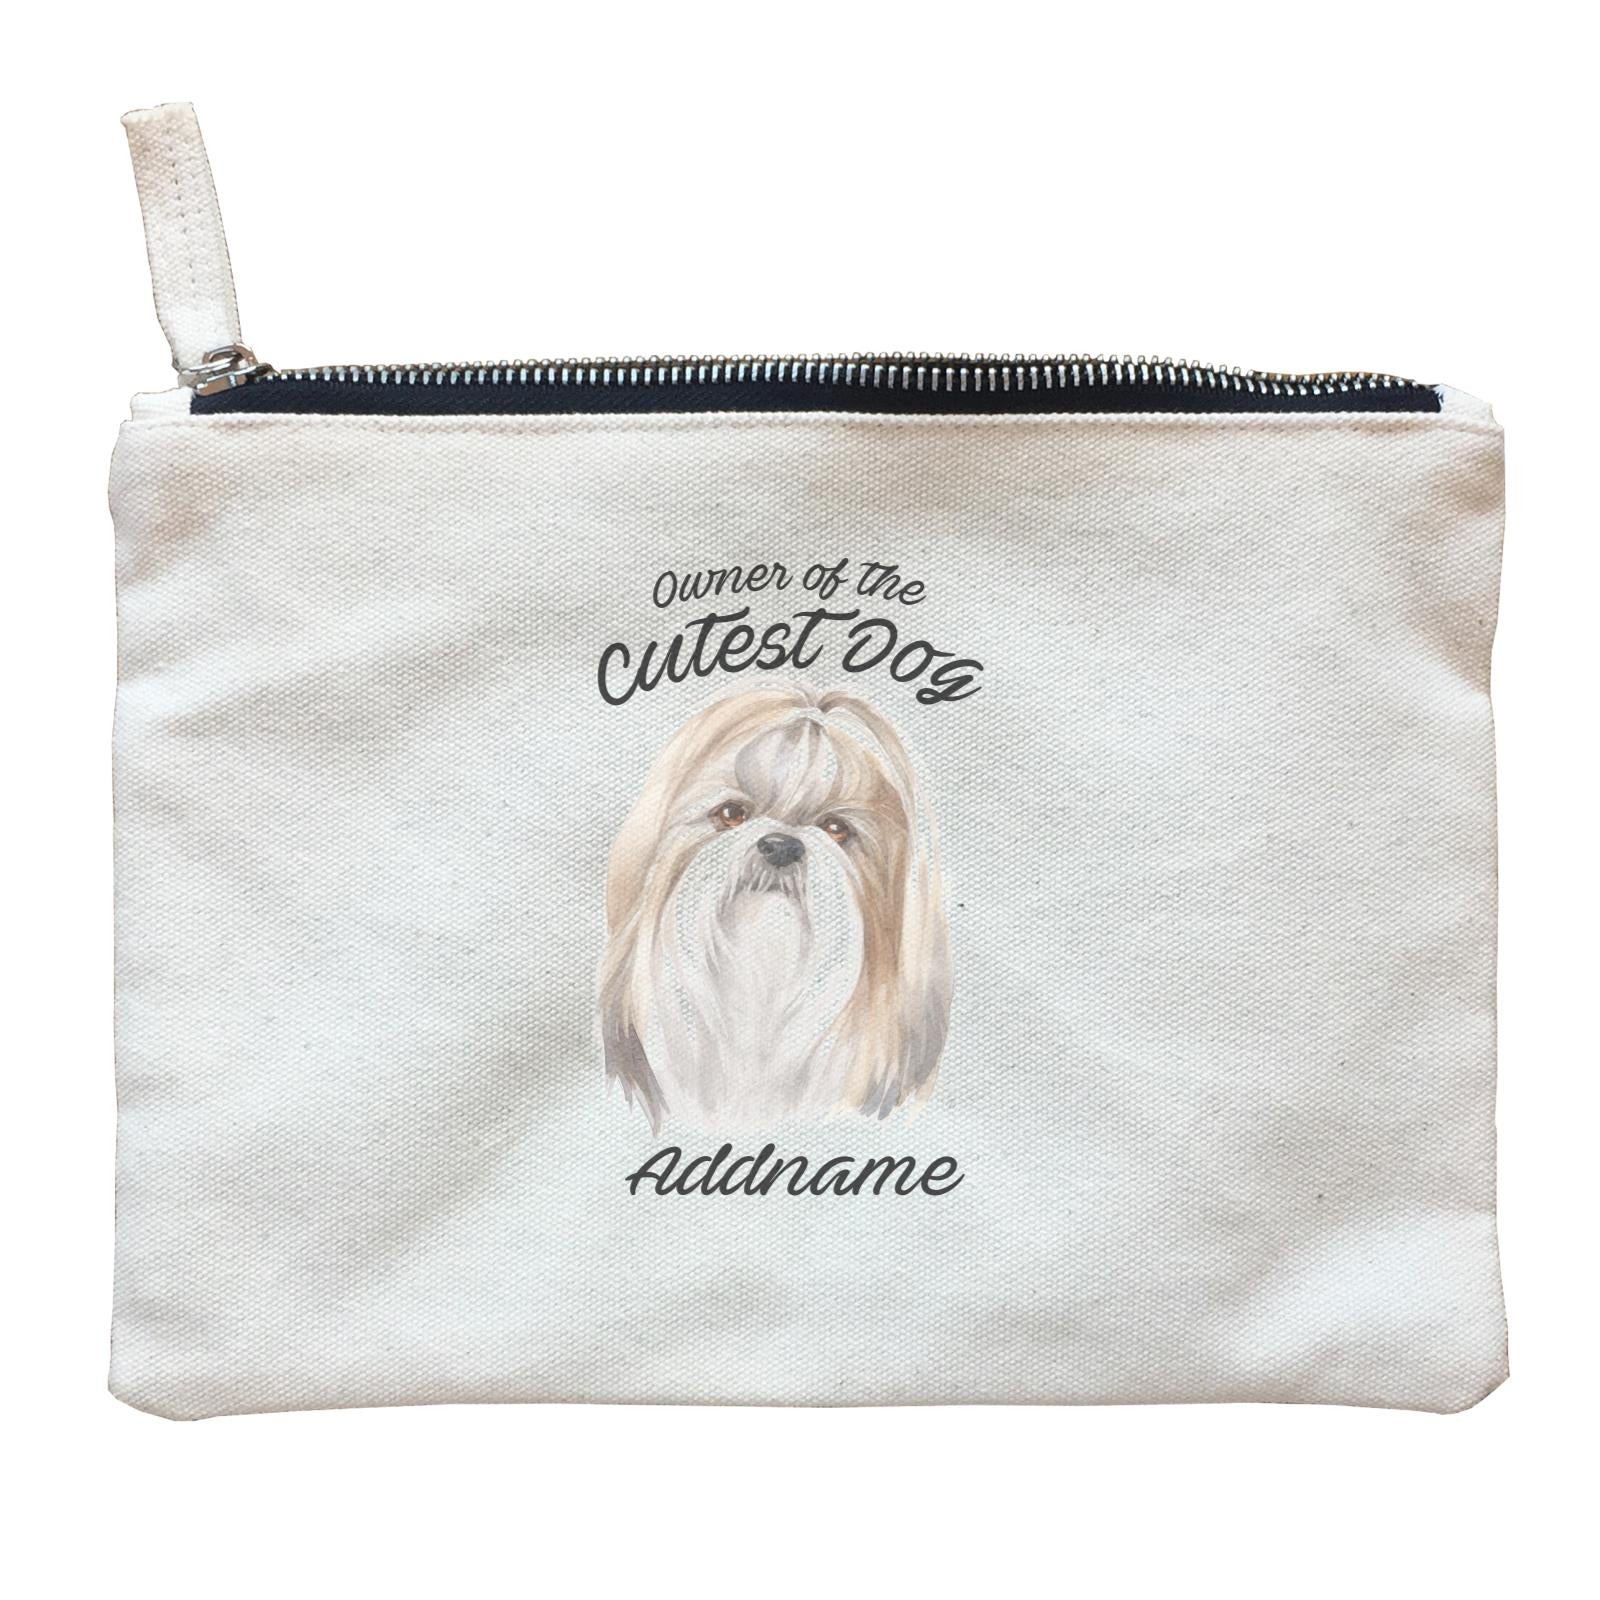 Watercolor Dog Owner Of The Cutest Dog Shih Tzu Addname Zipper Pouch